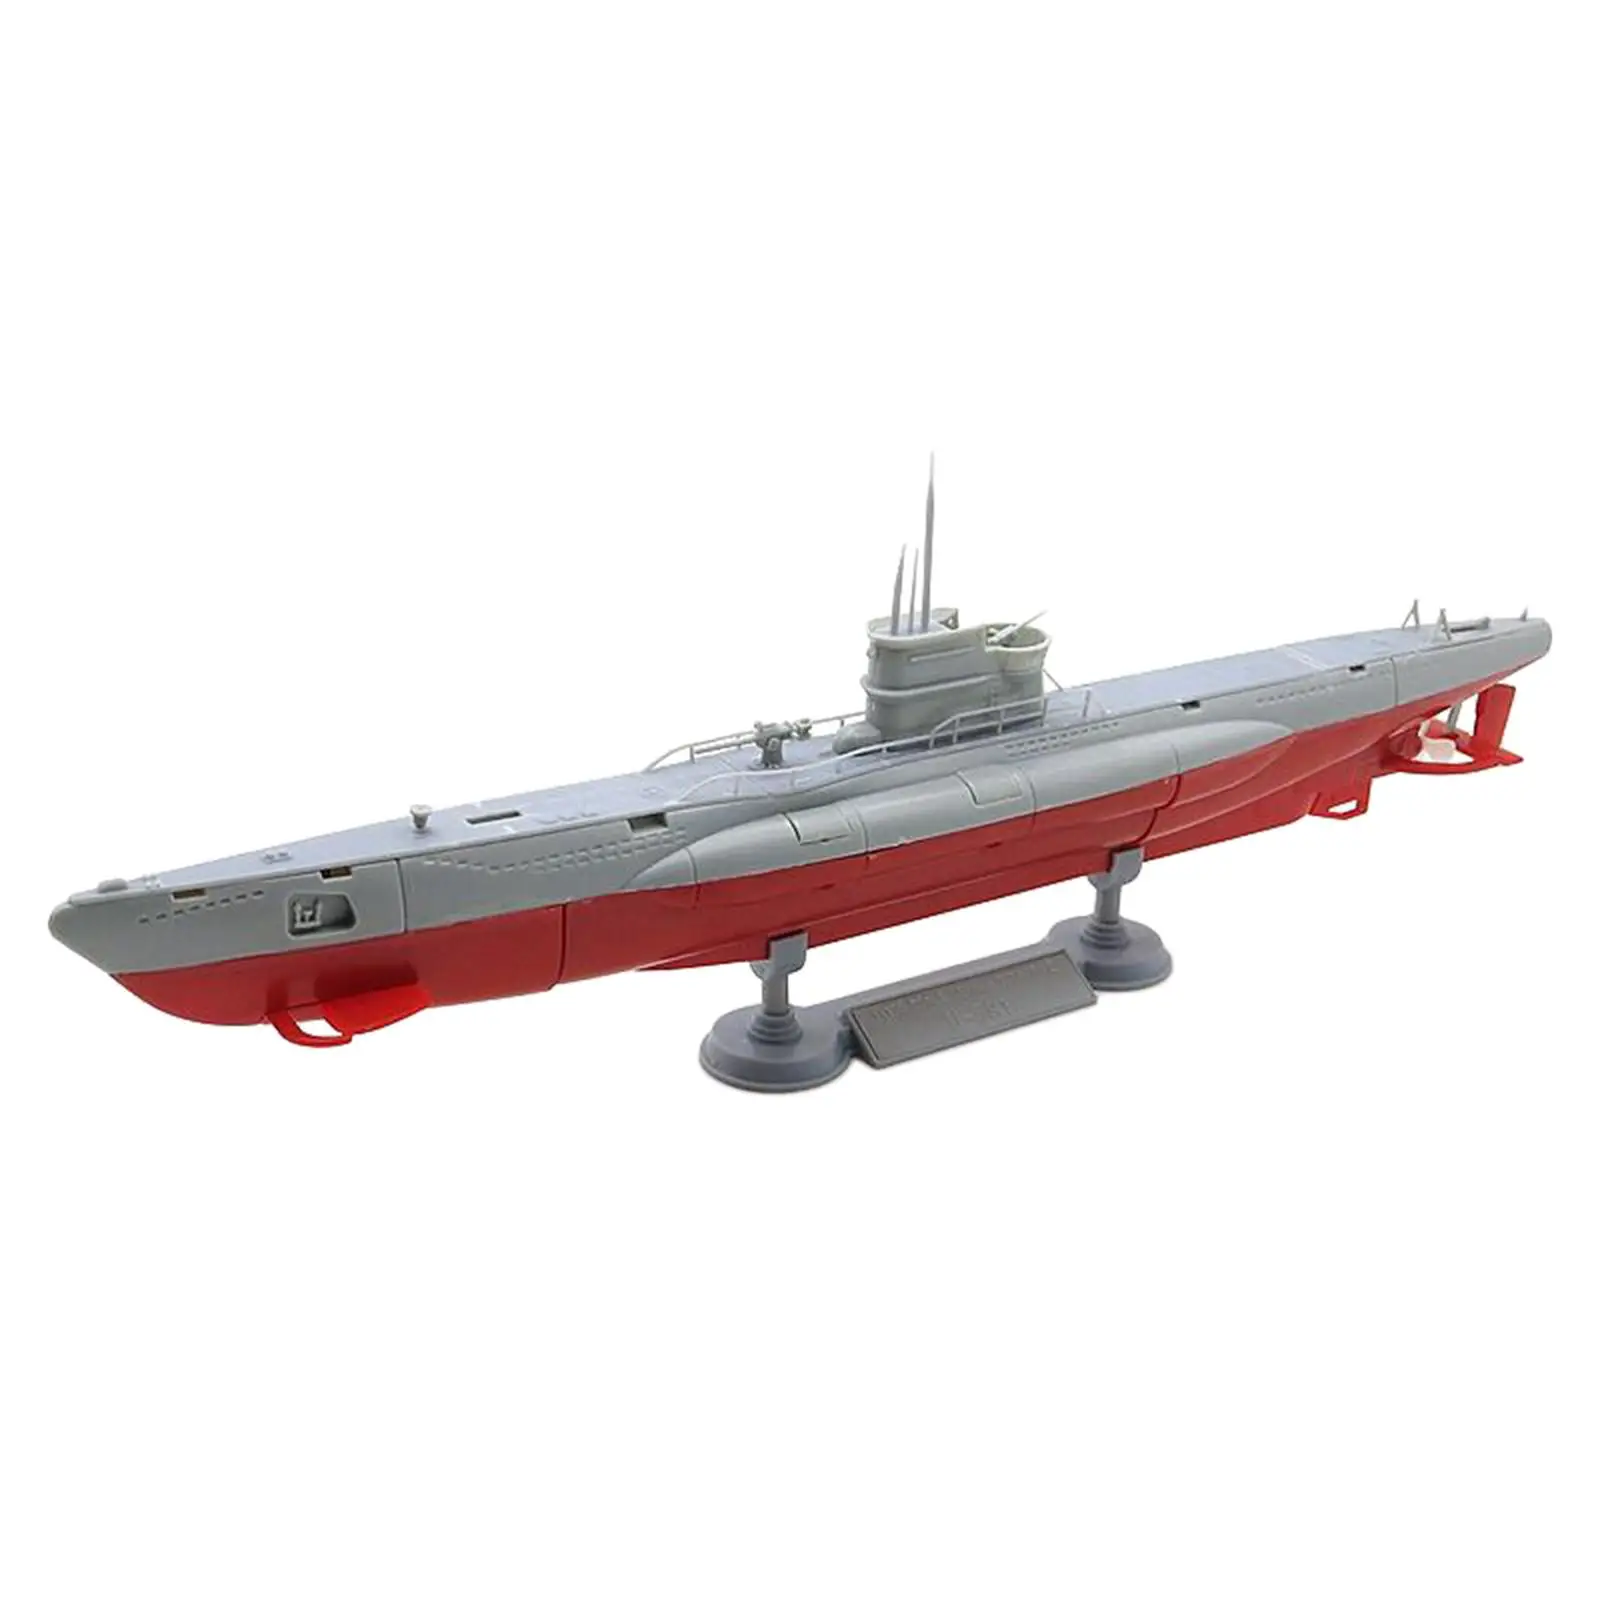 1:150 Scale Simulation Collection Ship Puzzle Display Warships Ship Toy Warship Assembly Model for Girls Adults Kids Boys Gifts